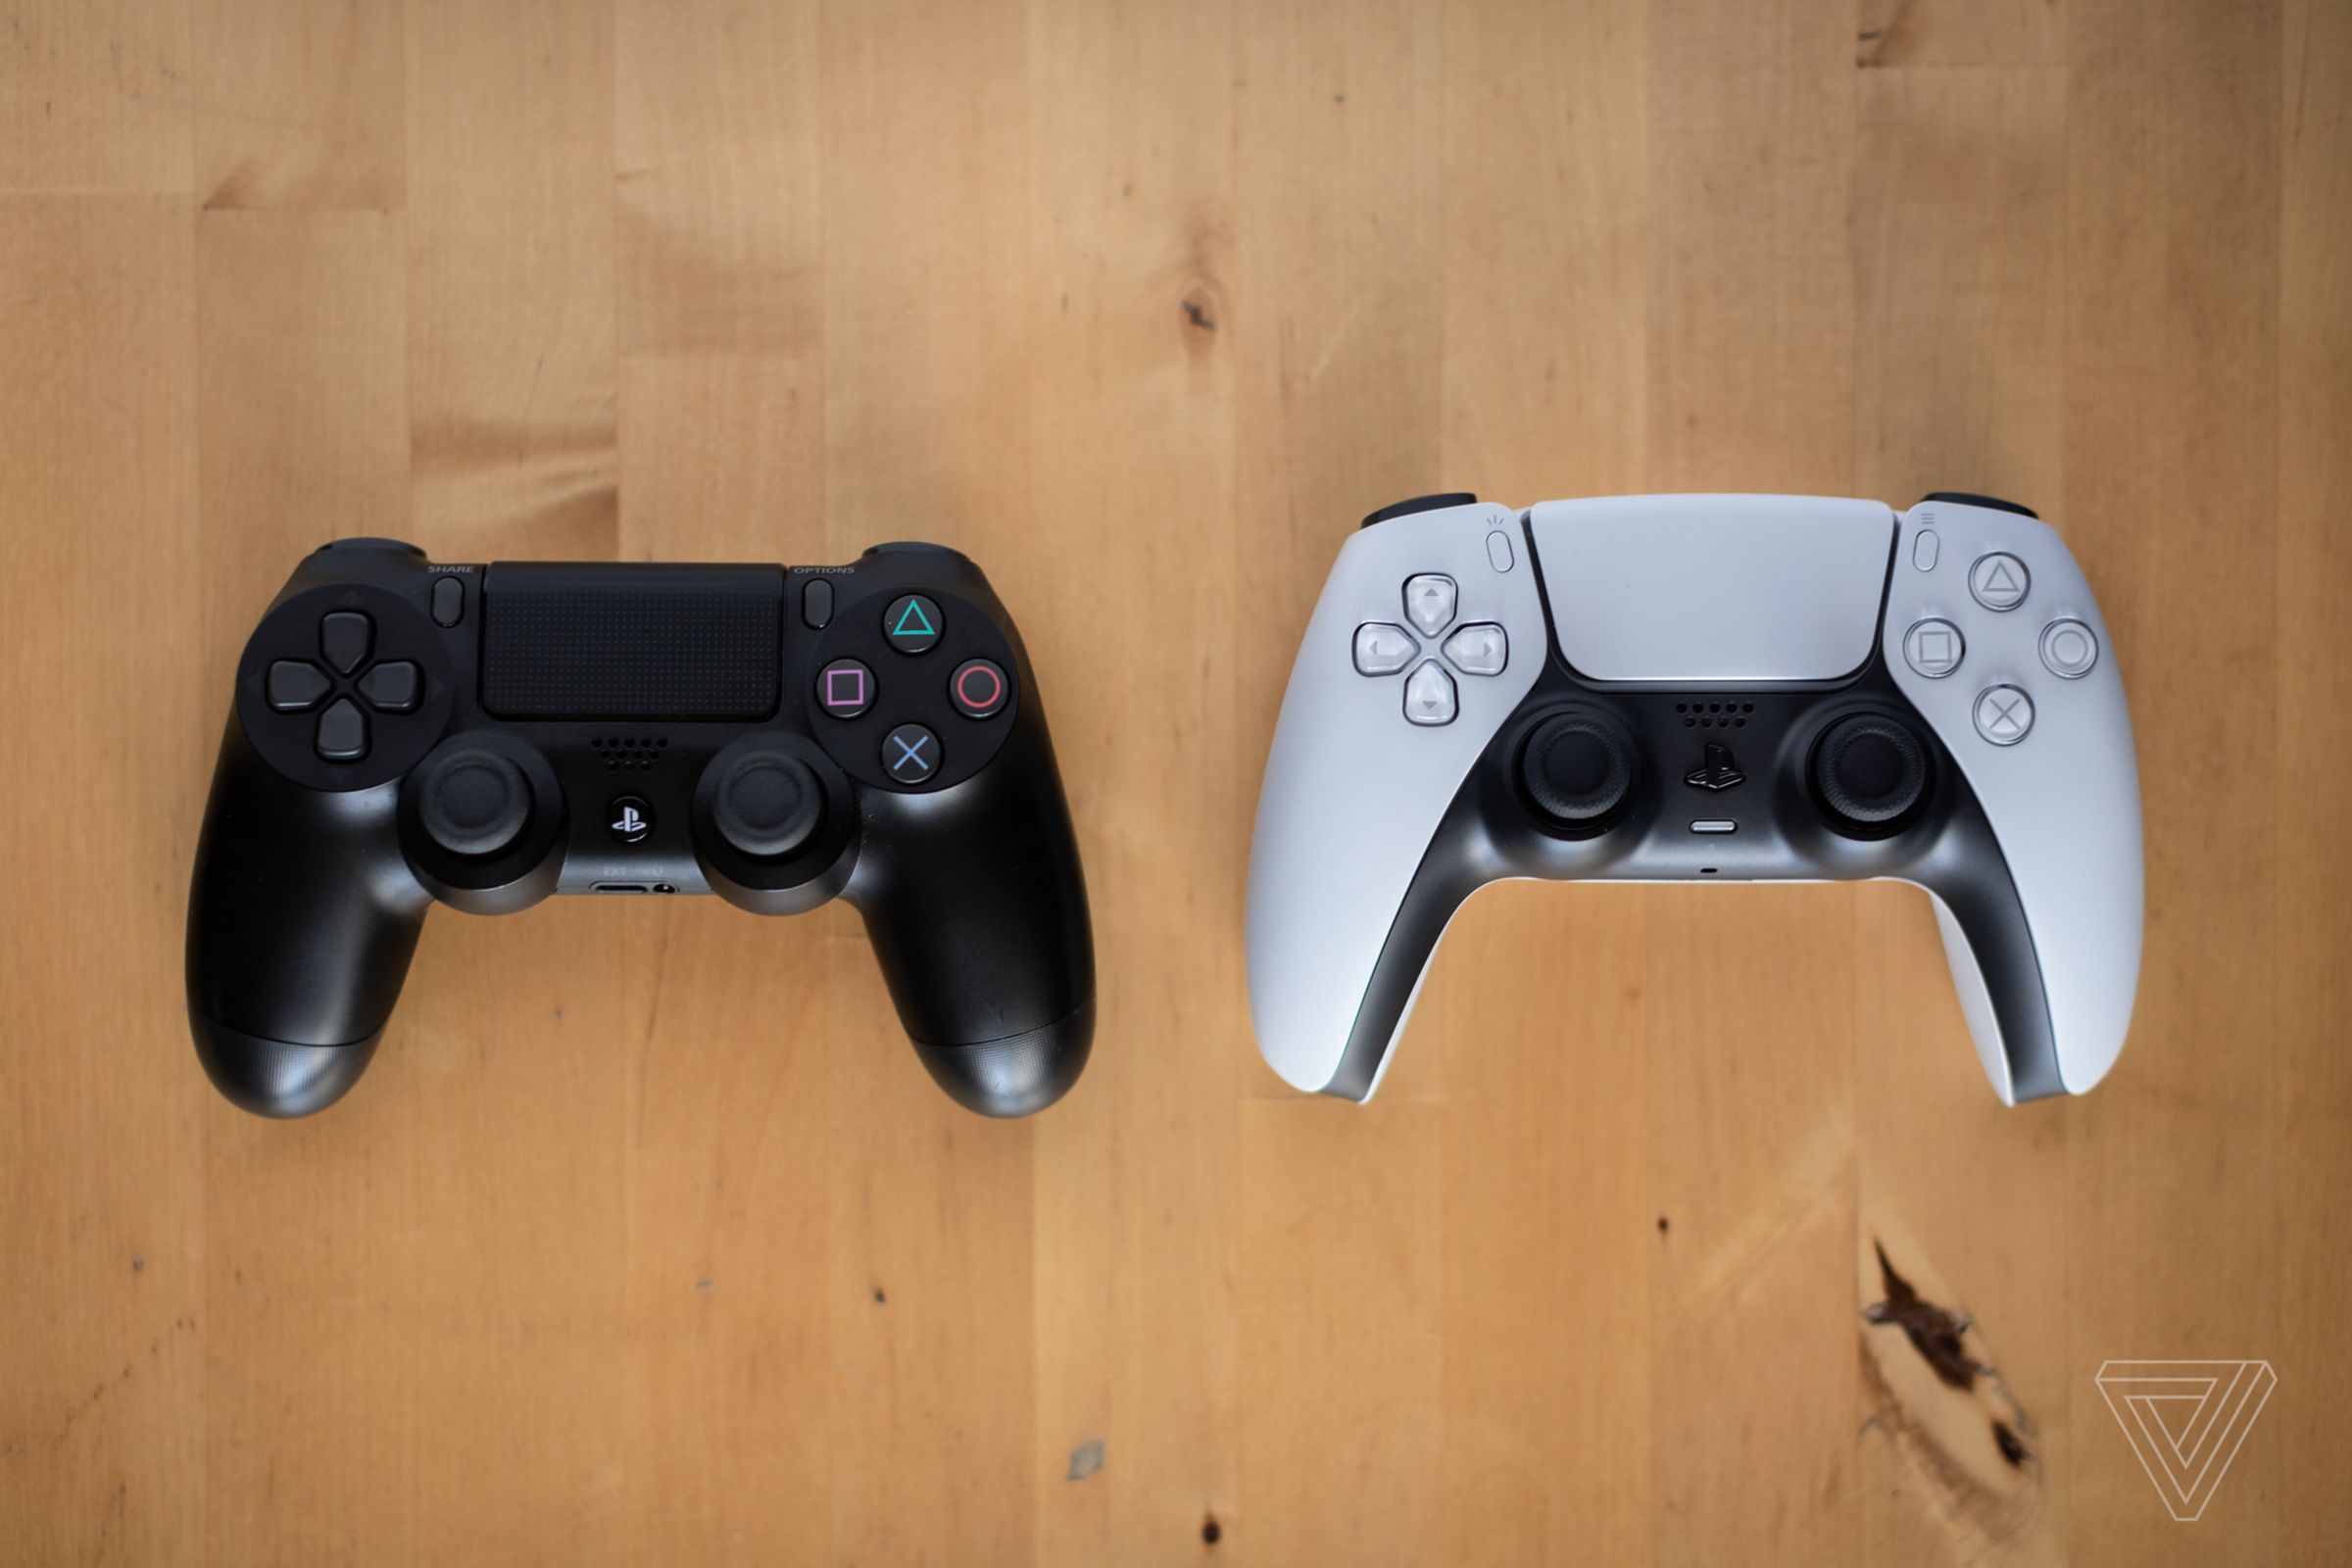 Every PS5 comes with a DualSense controller.  You can use the DualShock 4 controller, but it will only work when you're playing PS4 games on the next-gen console. 